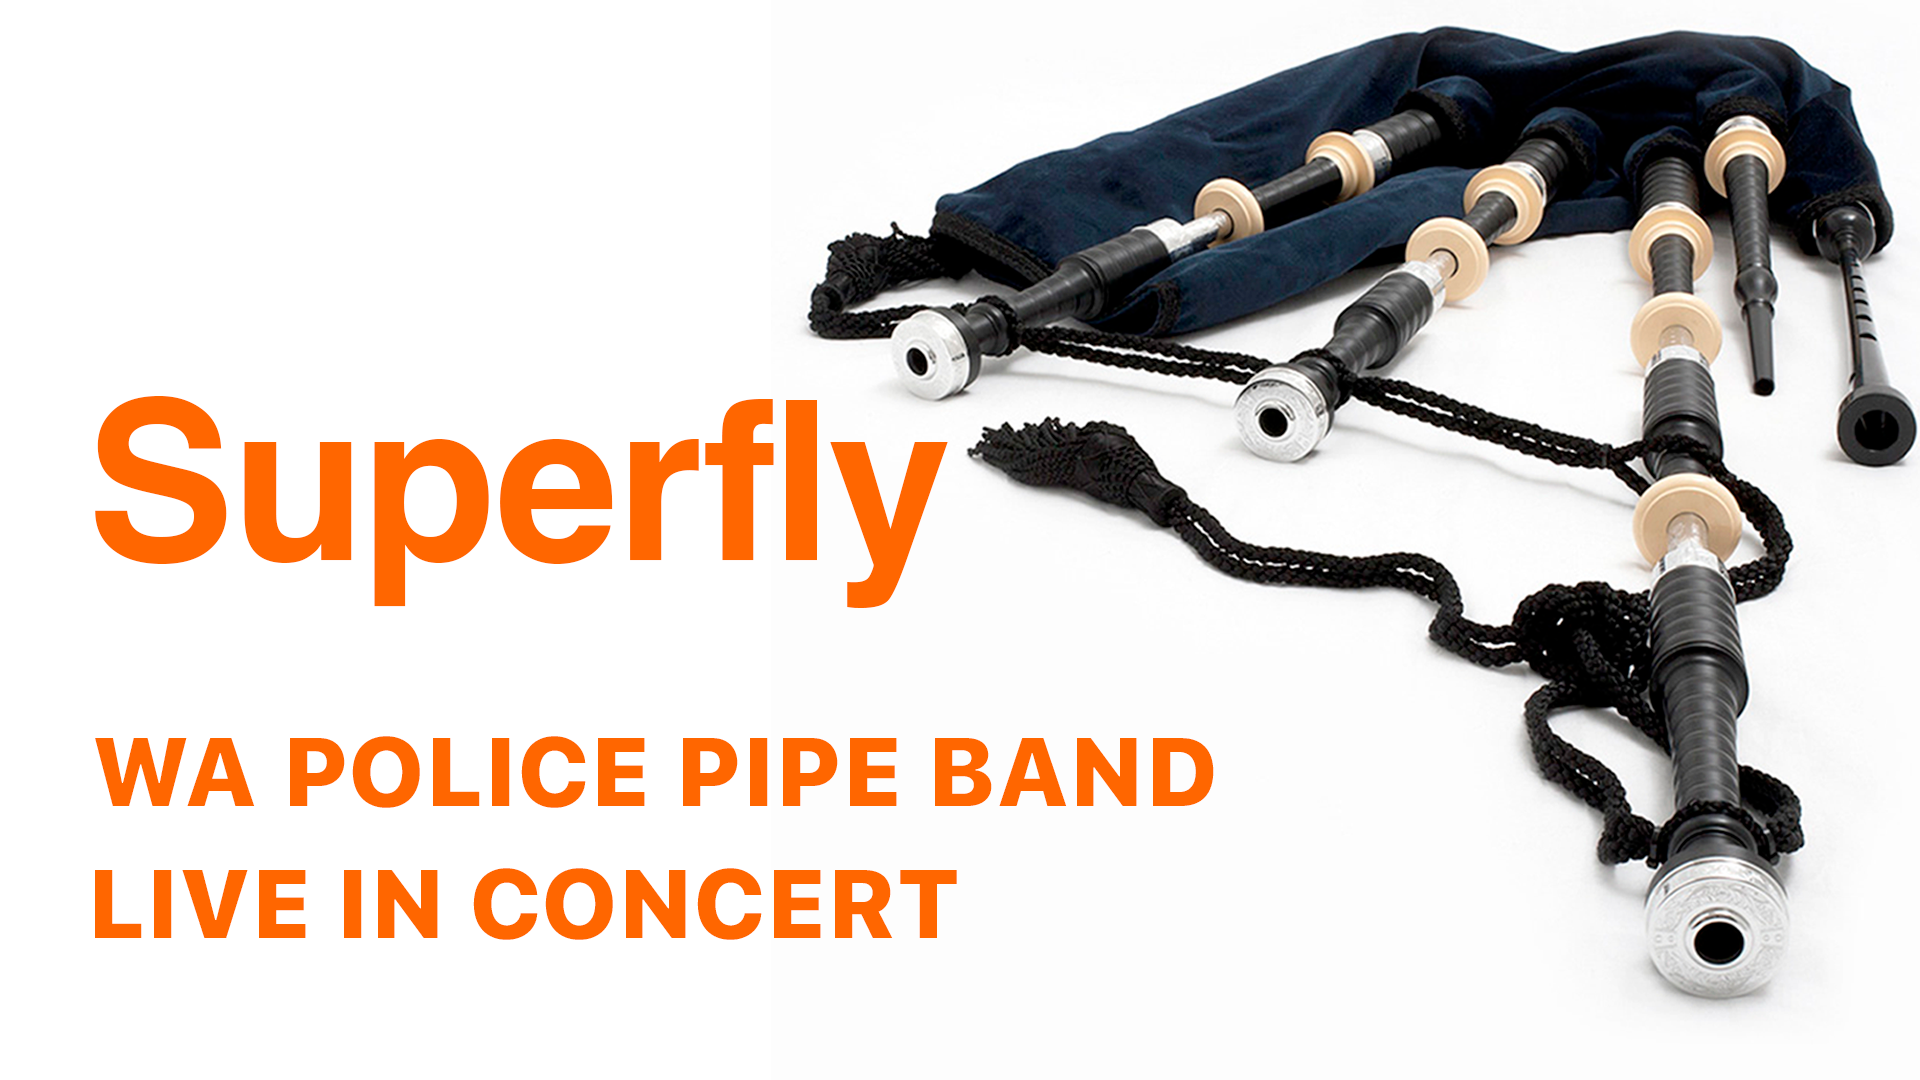 WAPOL Pipe Band Superfly Artwork